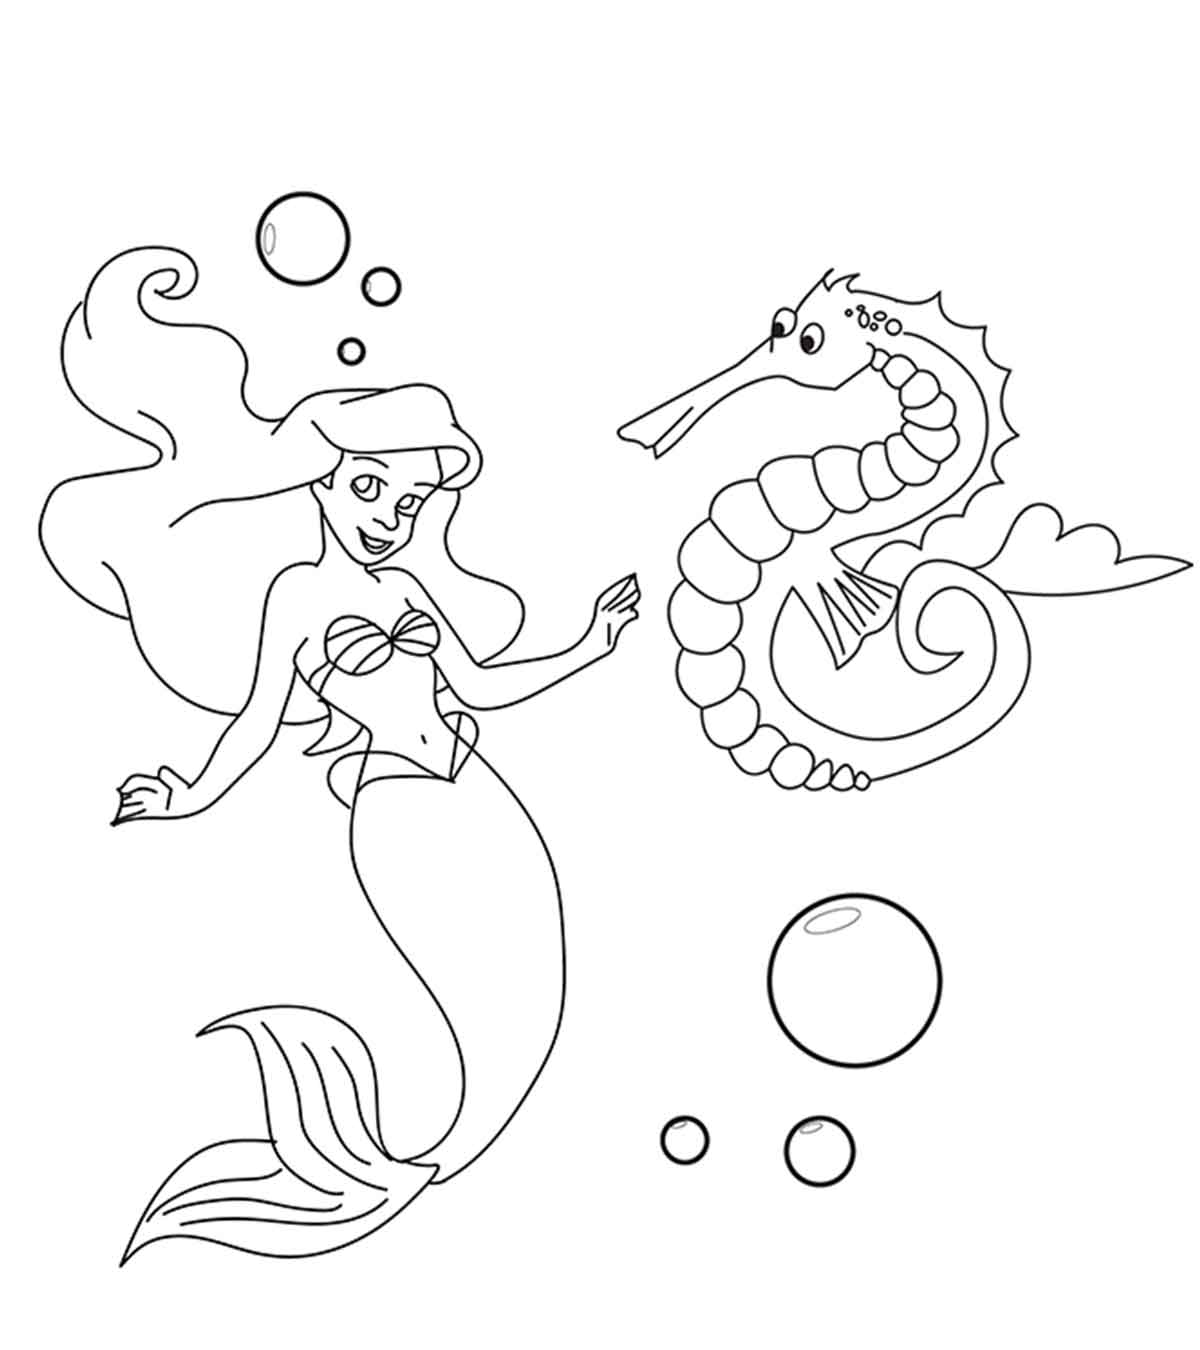 Top 10 Seahorse Coloring Pages For Your Little Ones